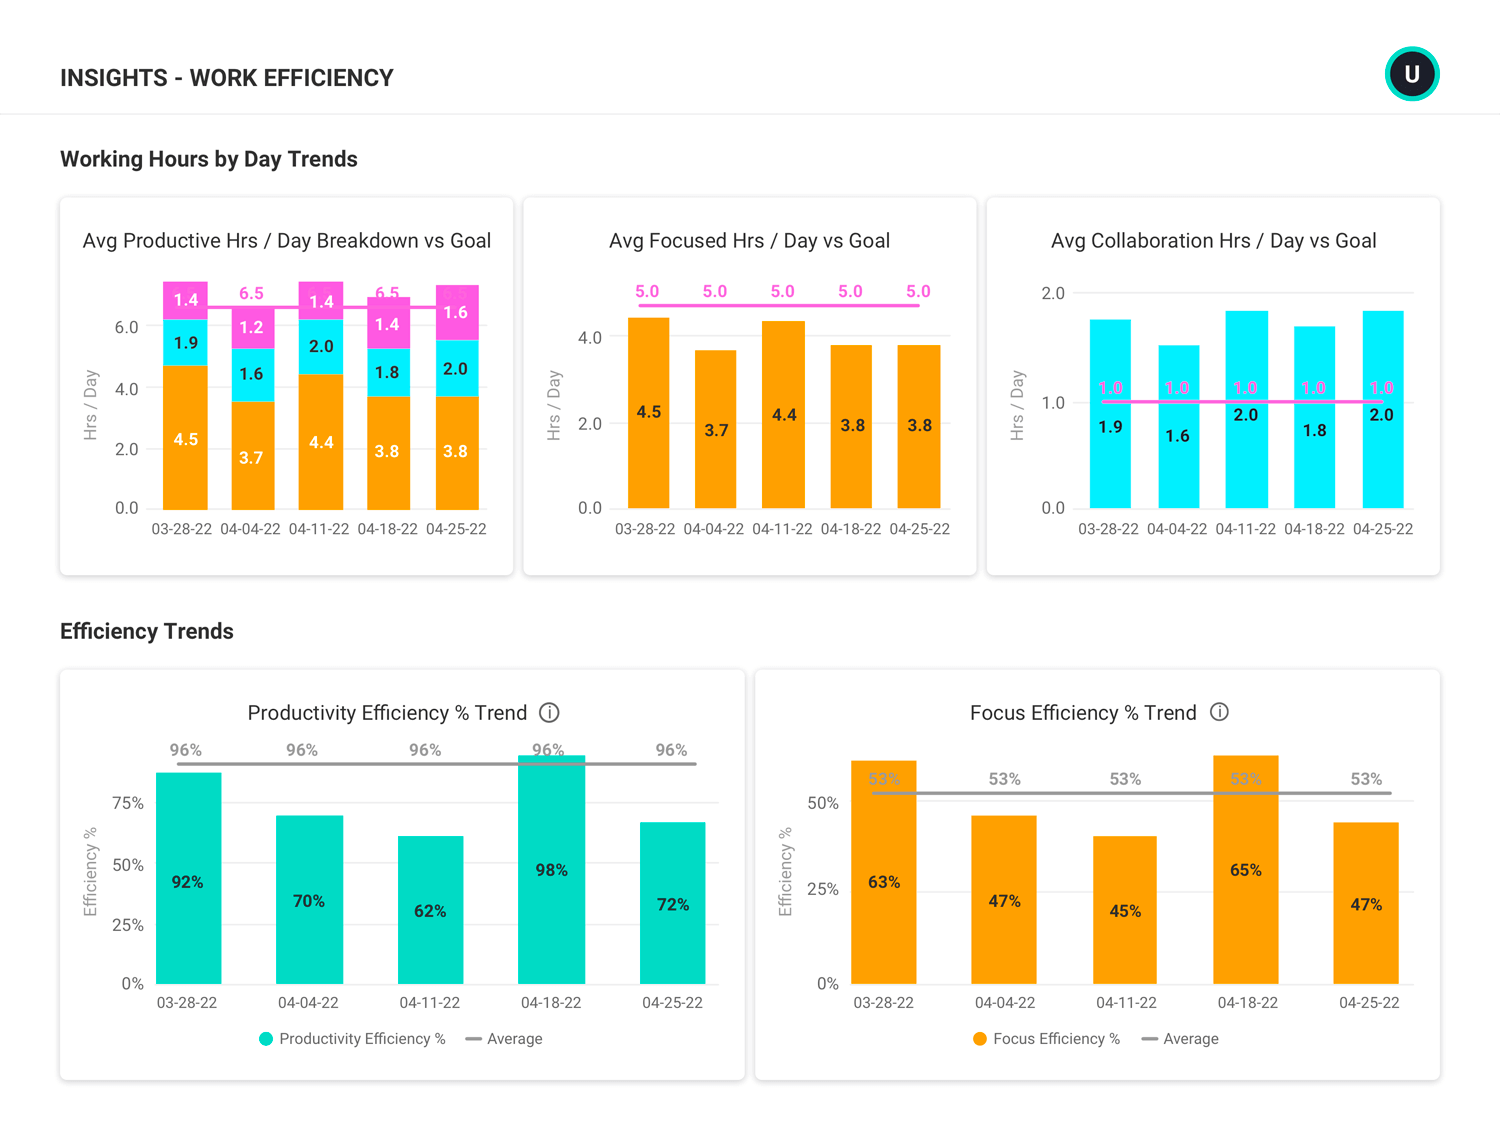 An Insights report showing benchmarks and goals. There's team averages from 4 dates and a line graph showing the daily trend.